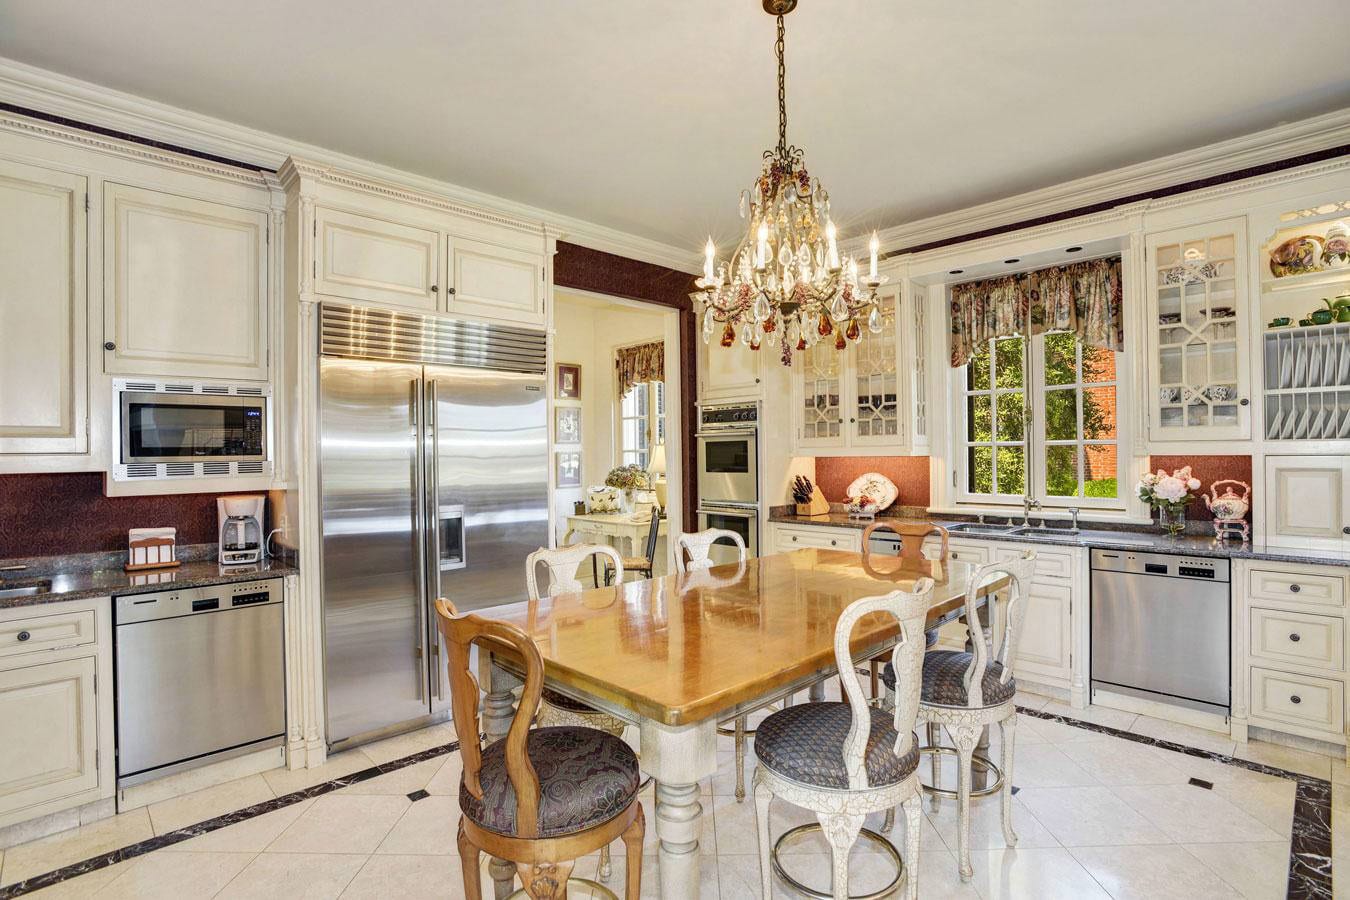 1800 Holly Beach Farm Road - Interior of Mansion Kitchen with View to Outside